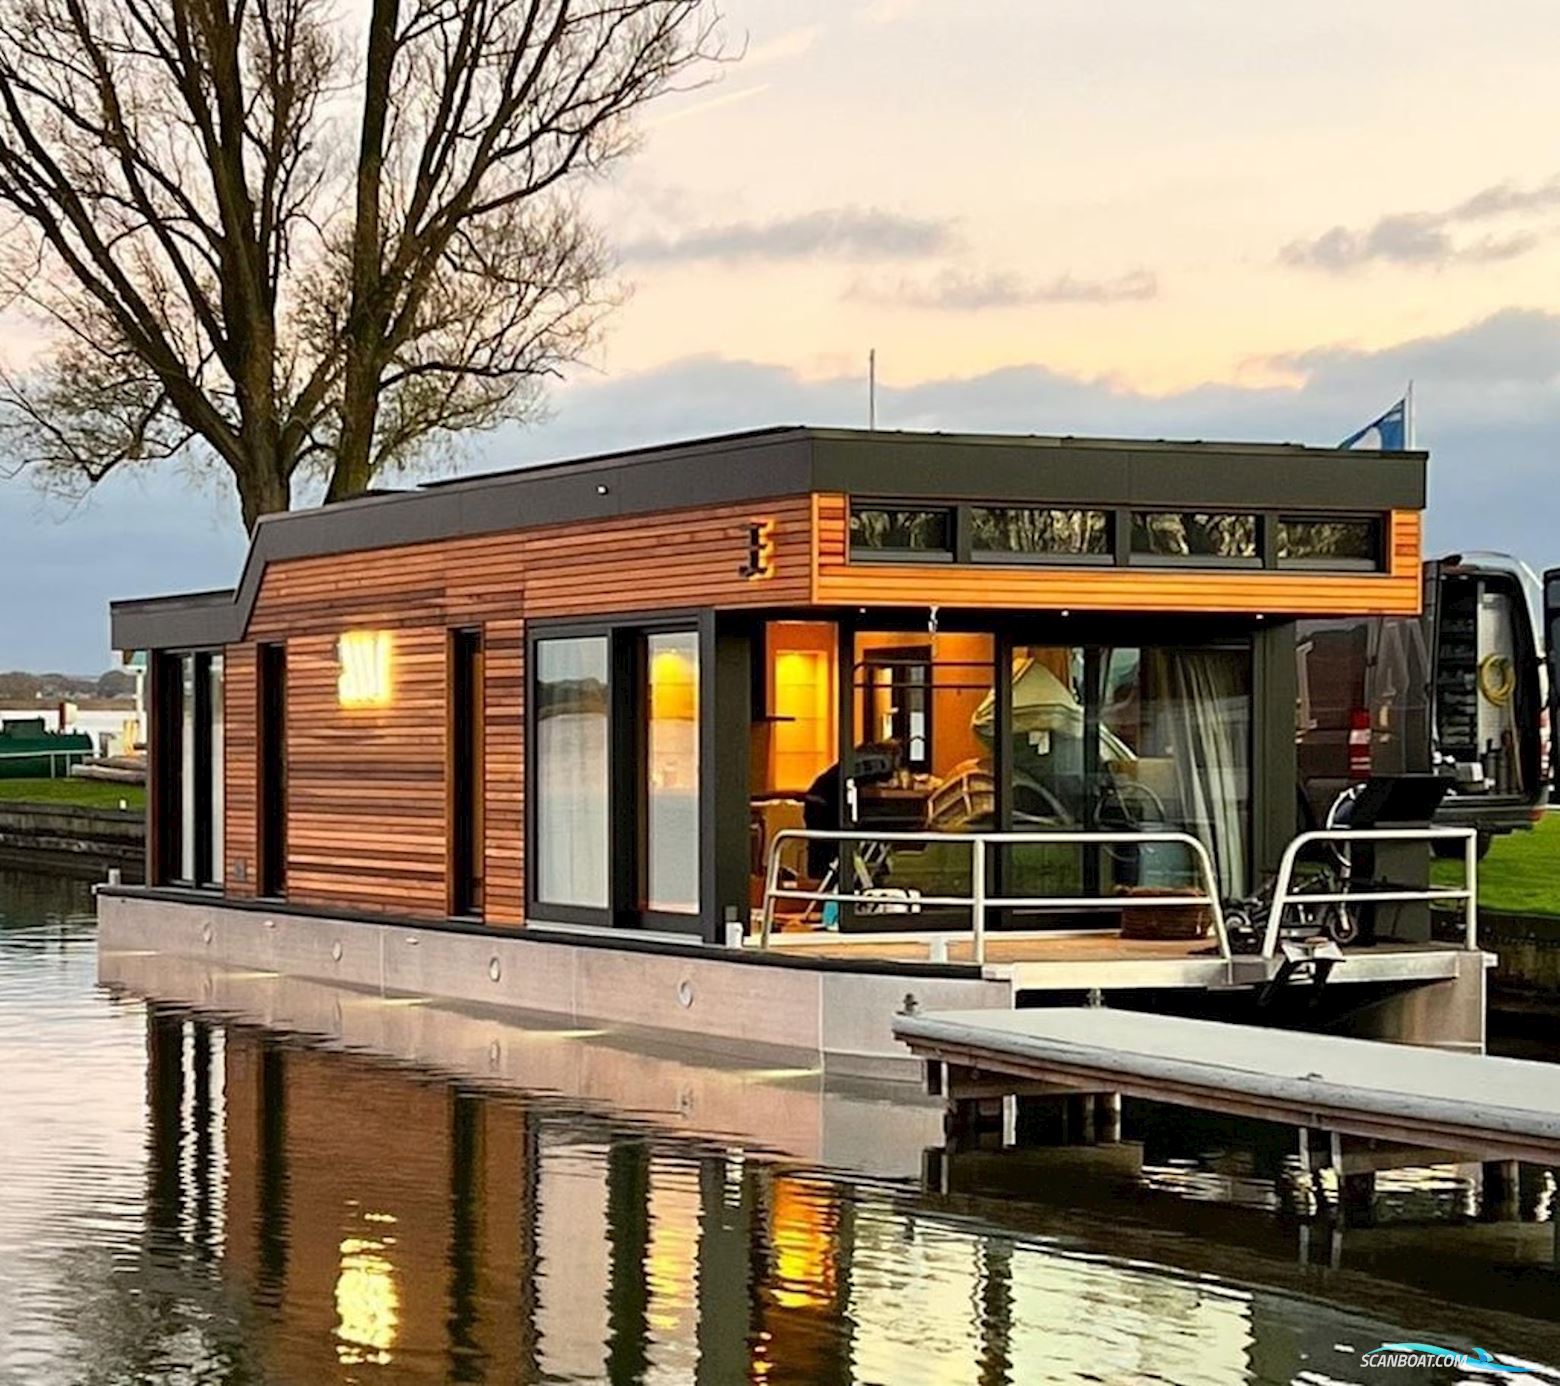 Tmboats Tmb57Eco Live a board / River boat 2021, The Netherlands